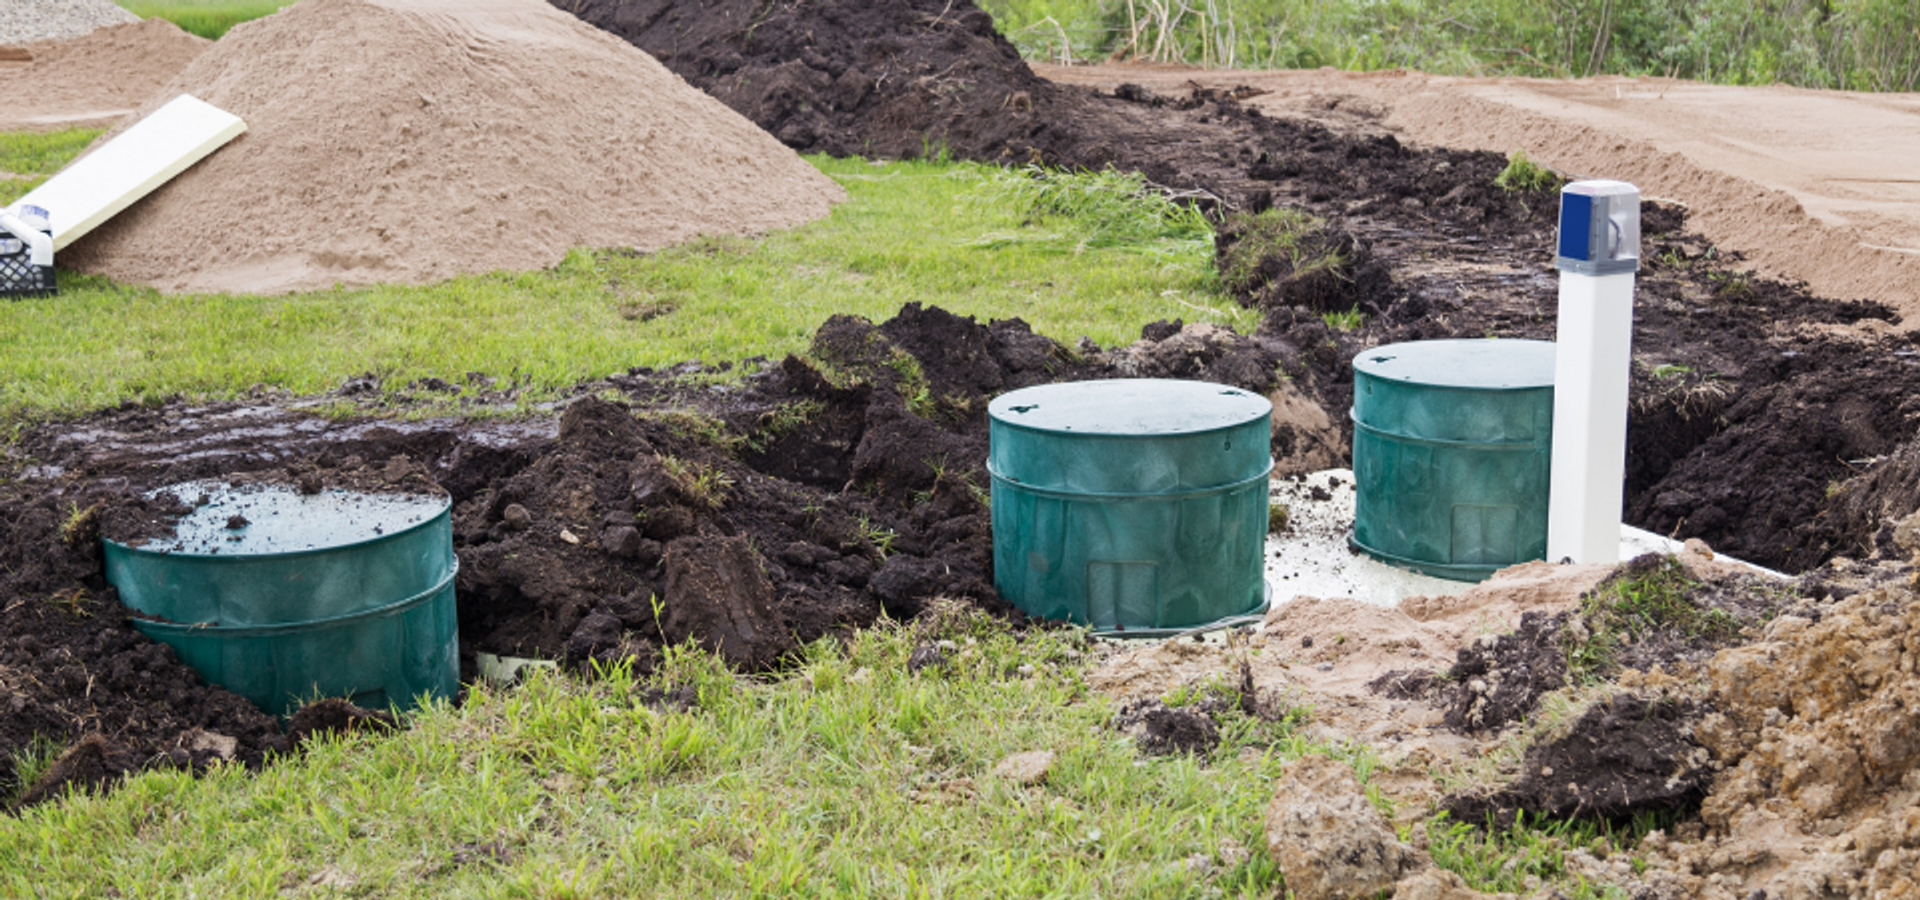 Wastewater and the Septic System